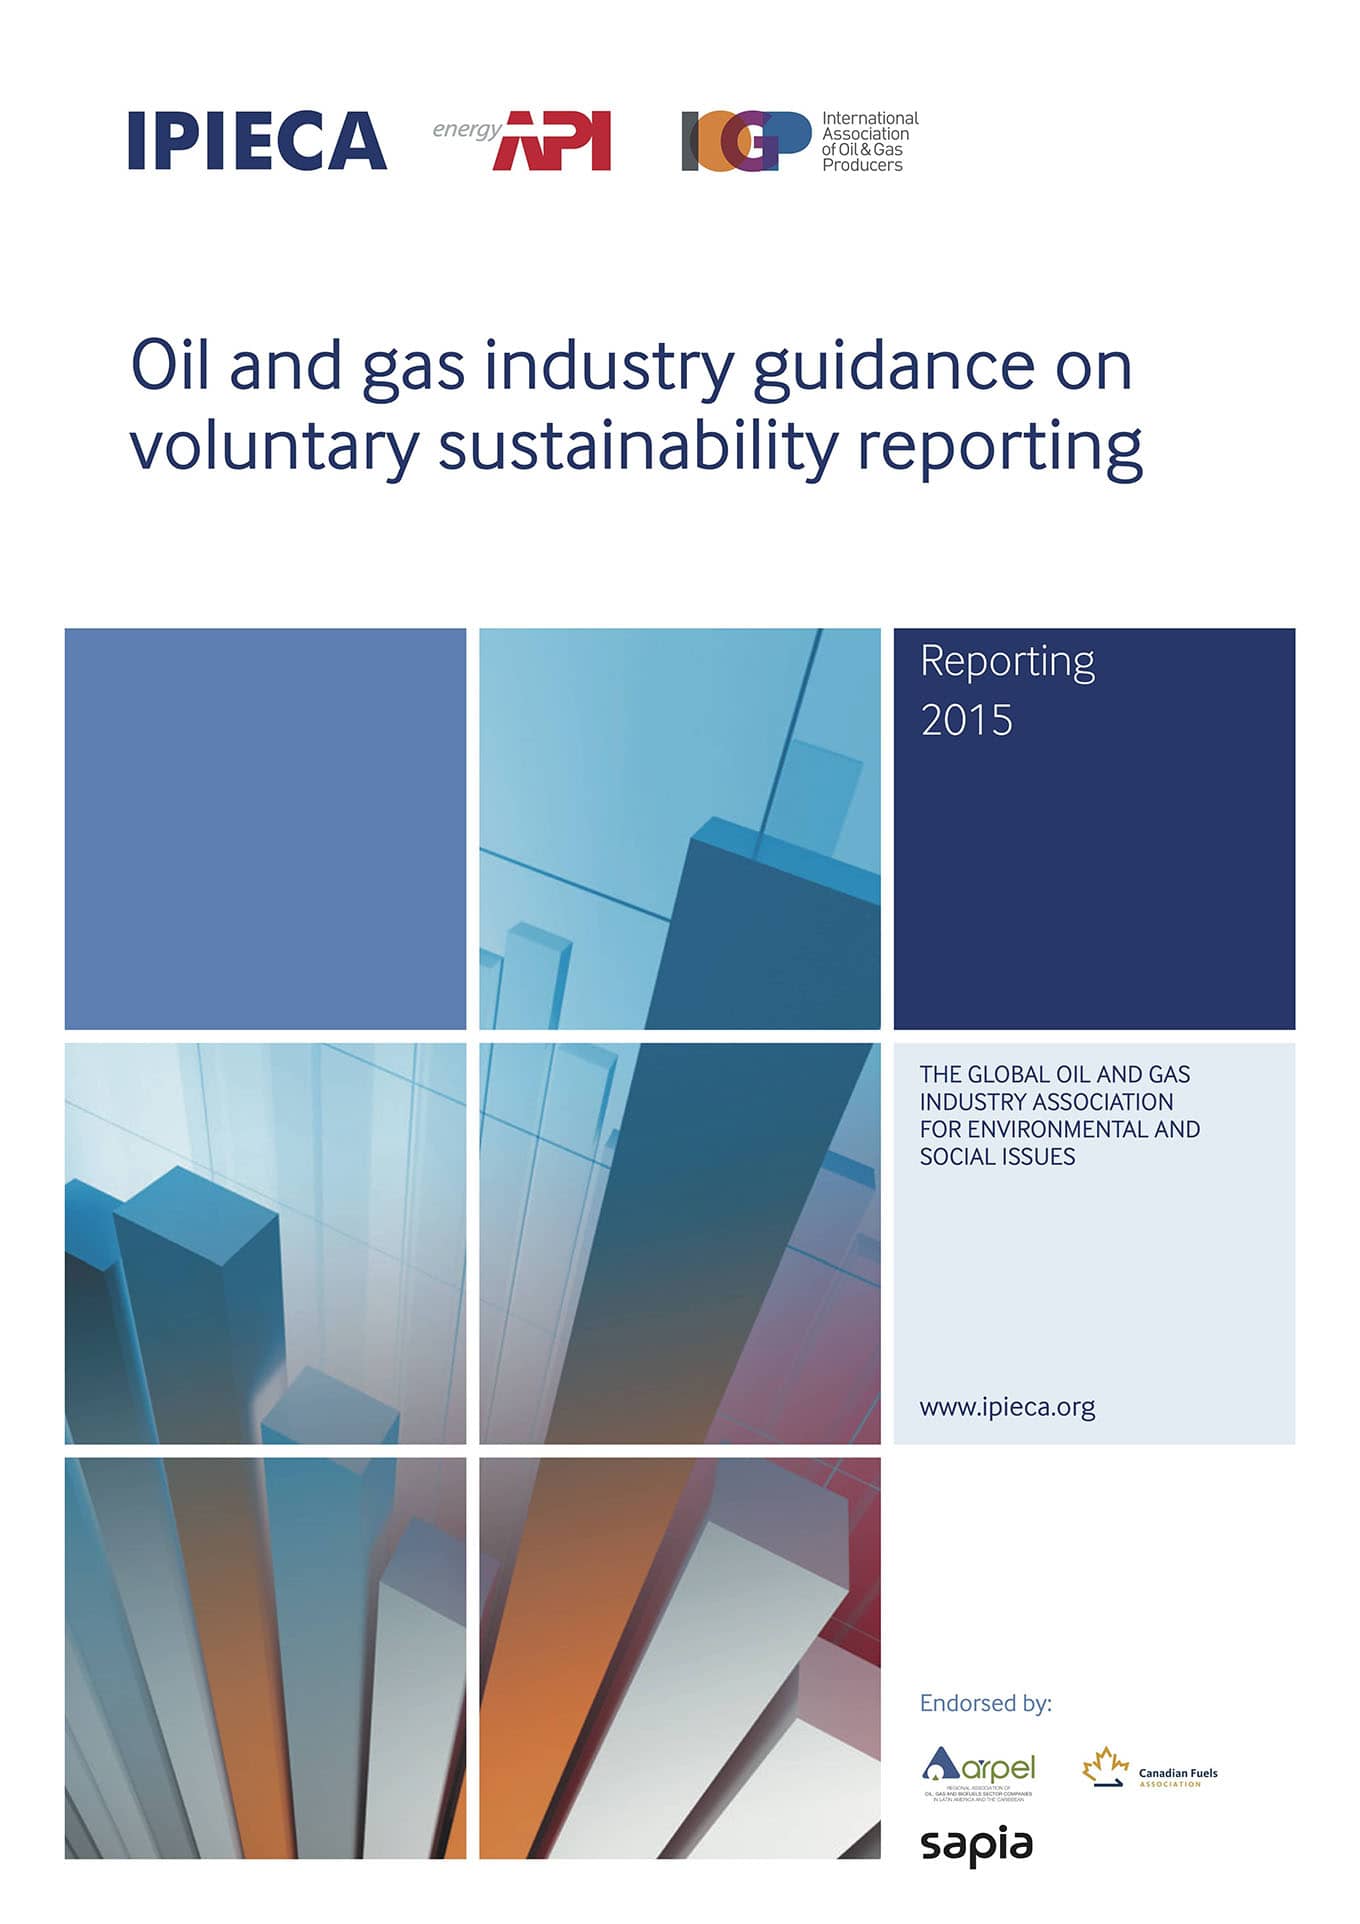 Oil and Gas Industry Guidance on Voluntary Sustainability Reporting (IPIECA, API and OGP, 2015)